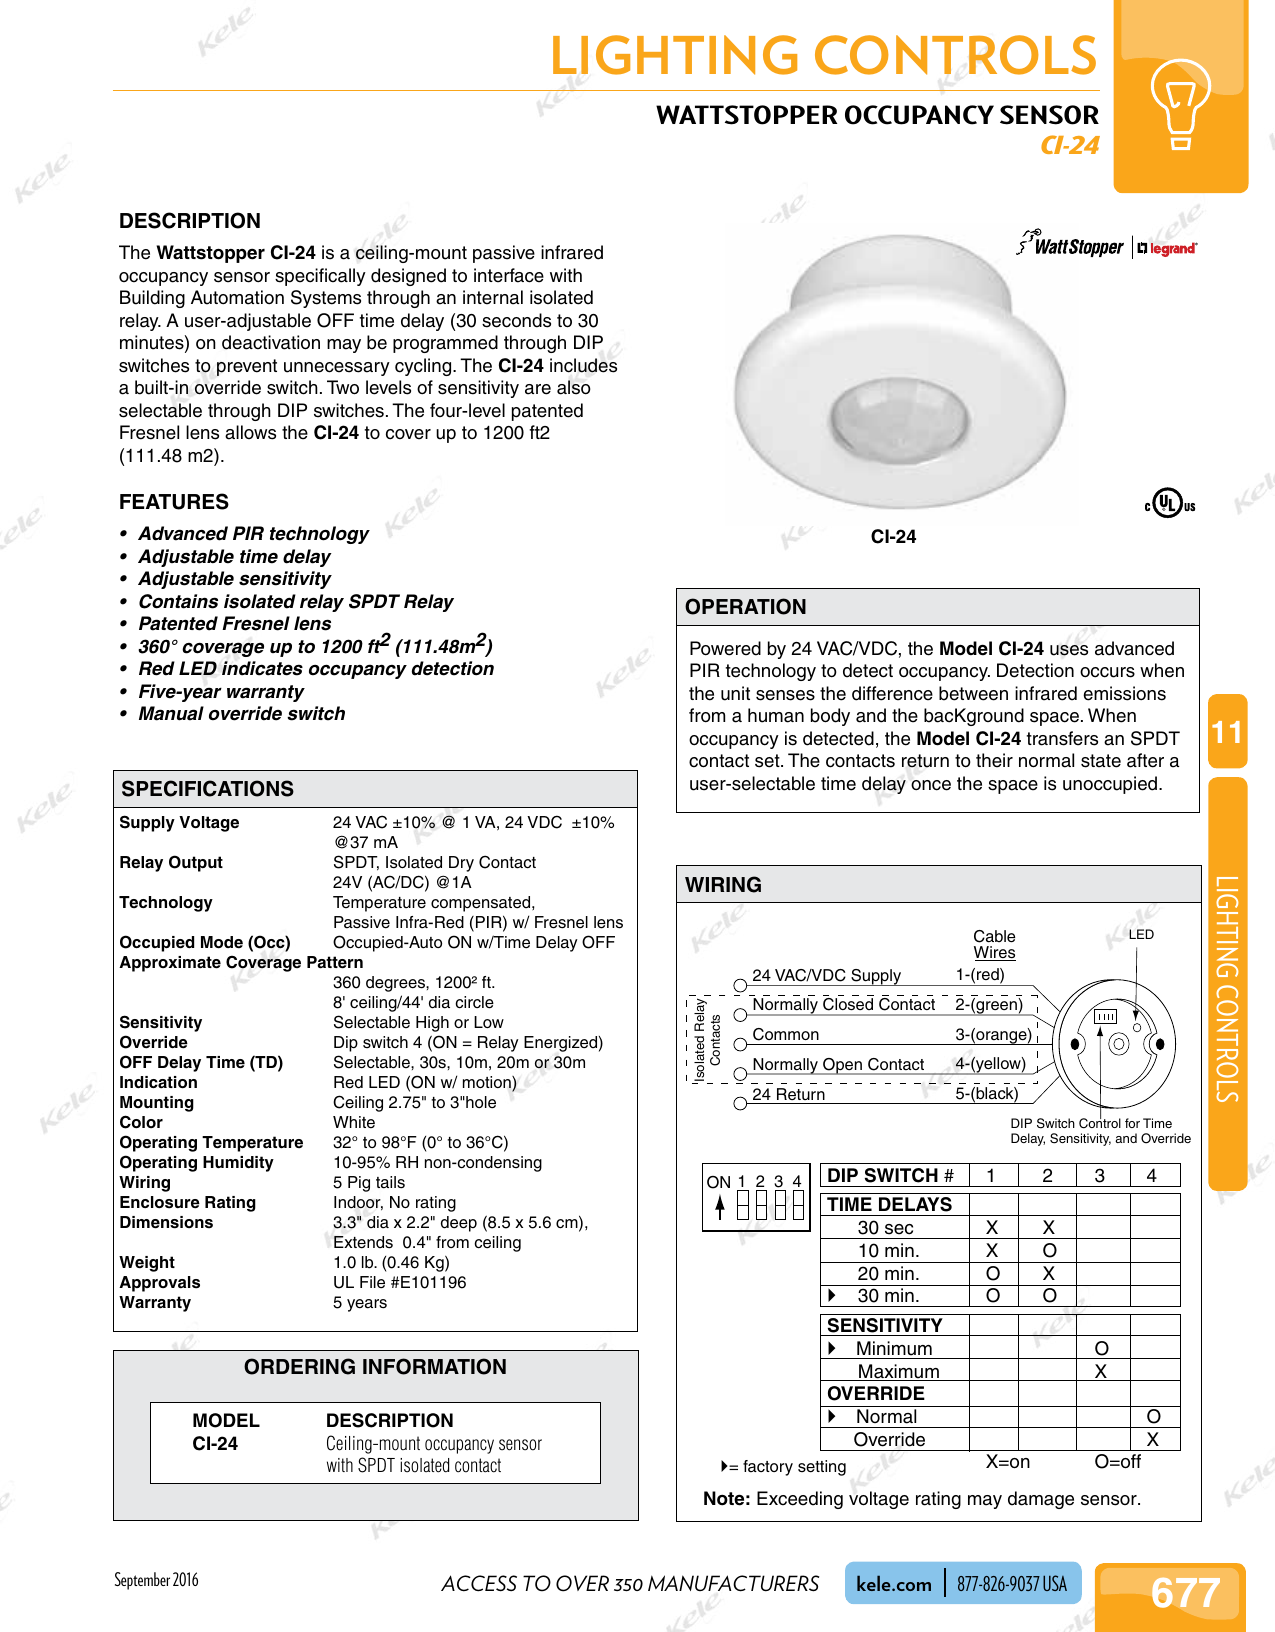 Ceiling Occupancy Sensor With Override Switch | Shelly Lighting